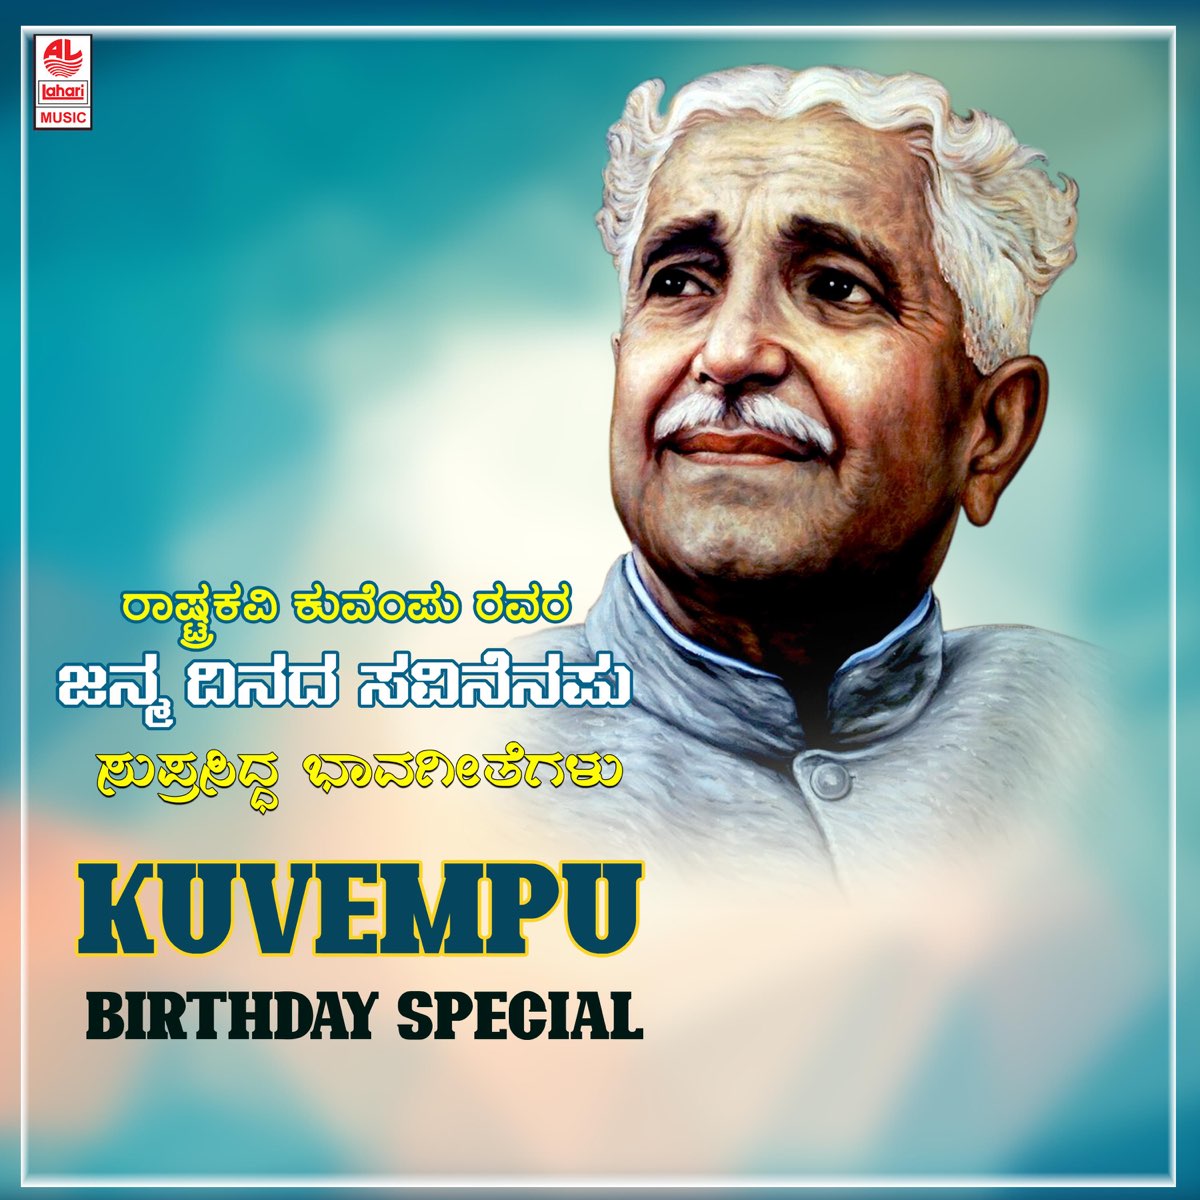 Kuvempu - Birthday Special by Various Artists on Apple Music